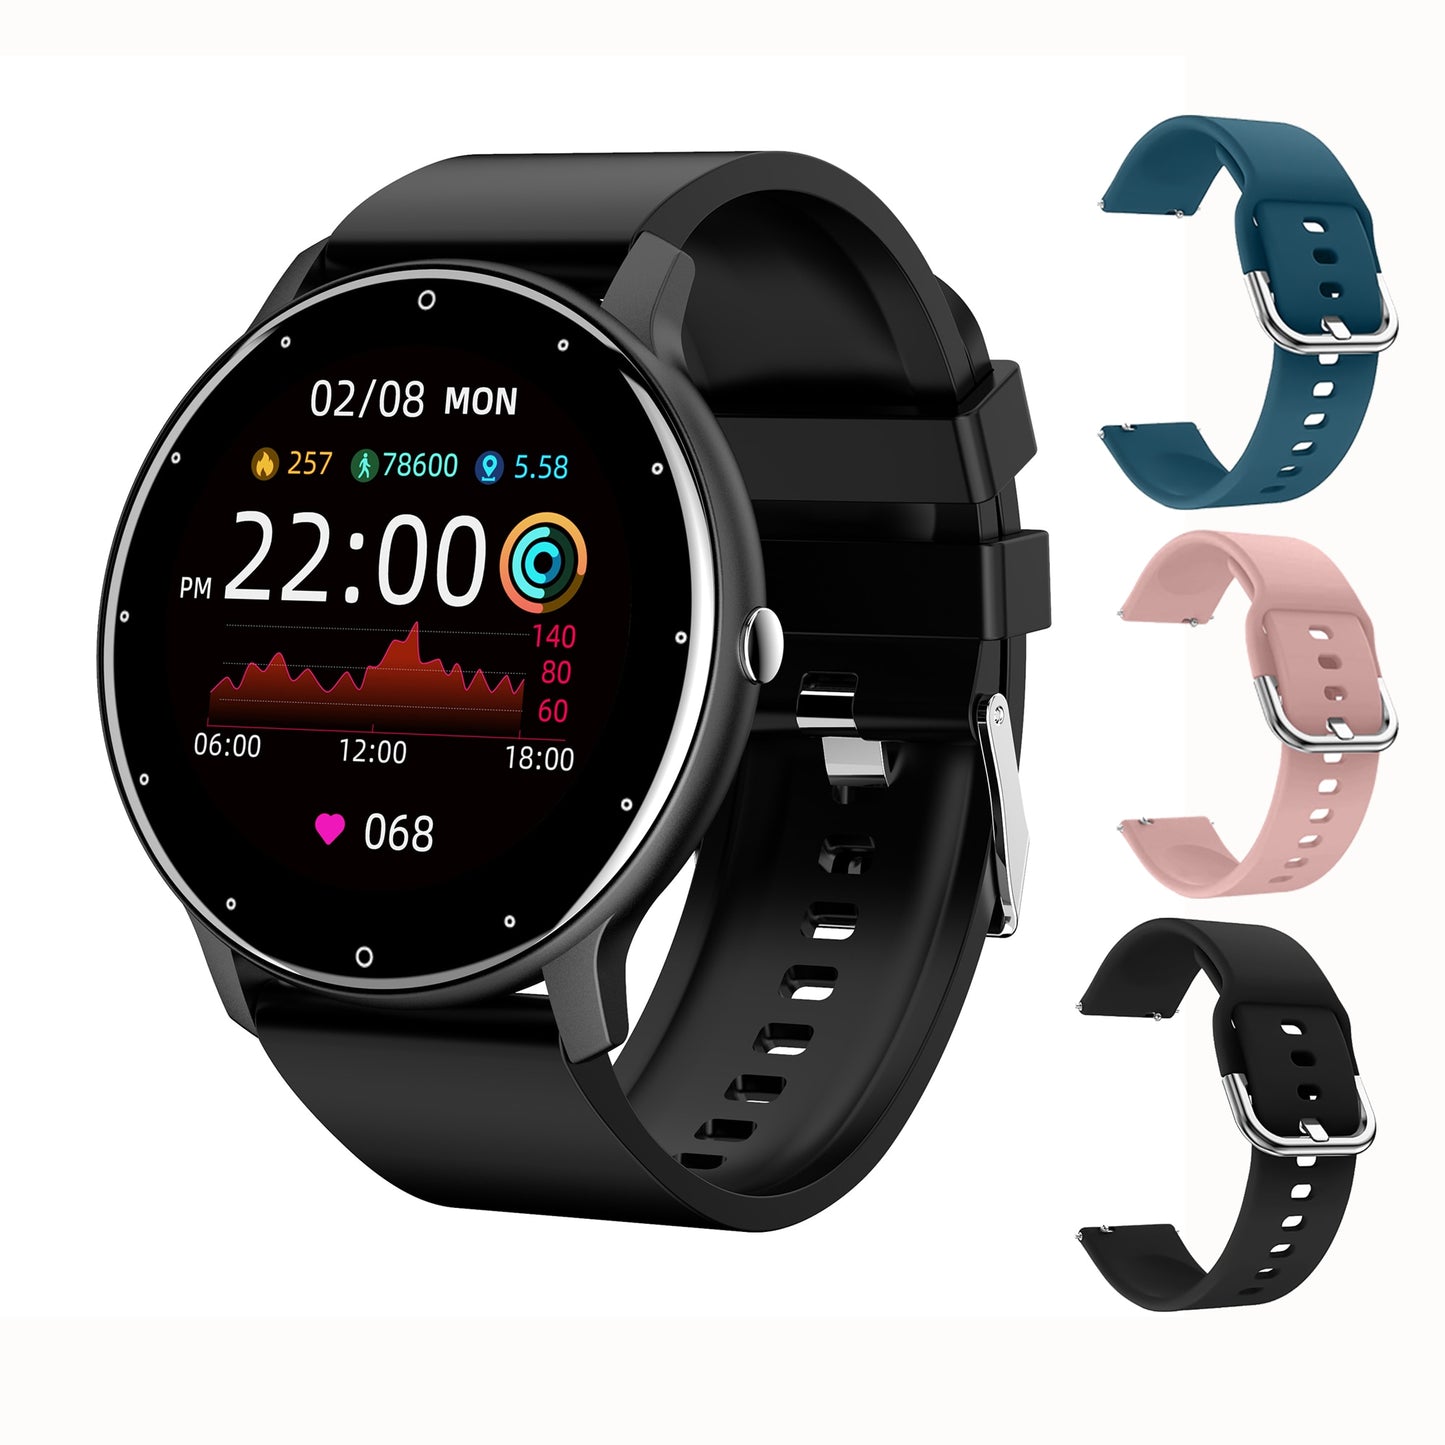 CanMixs 2023 New Smart Watch Women Men Lady Sport Fitness Smartwatch Sleep Heart Rate Monitor Waterproof Watches For IOS Android